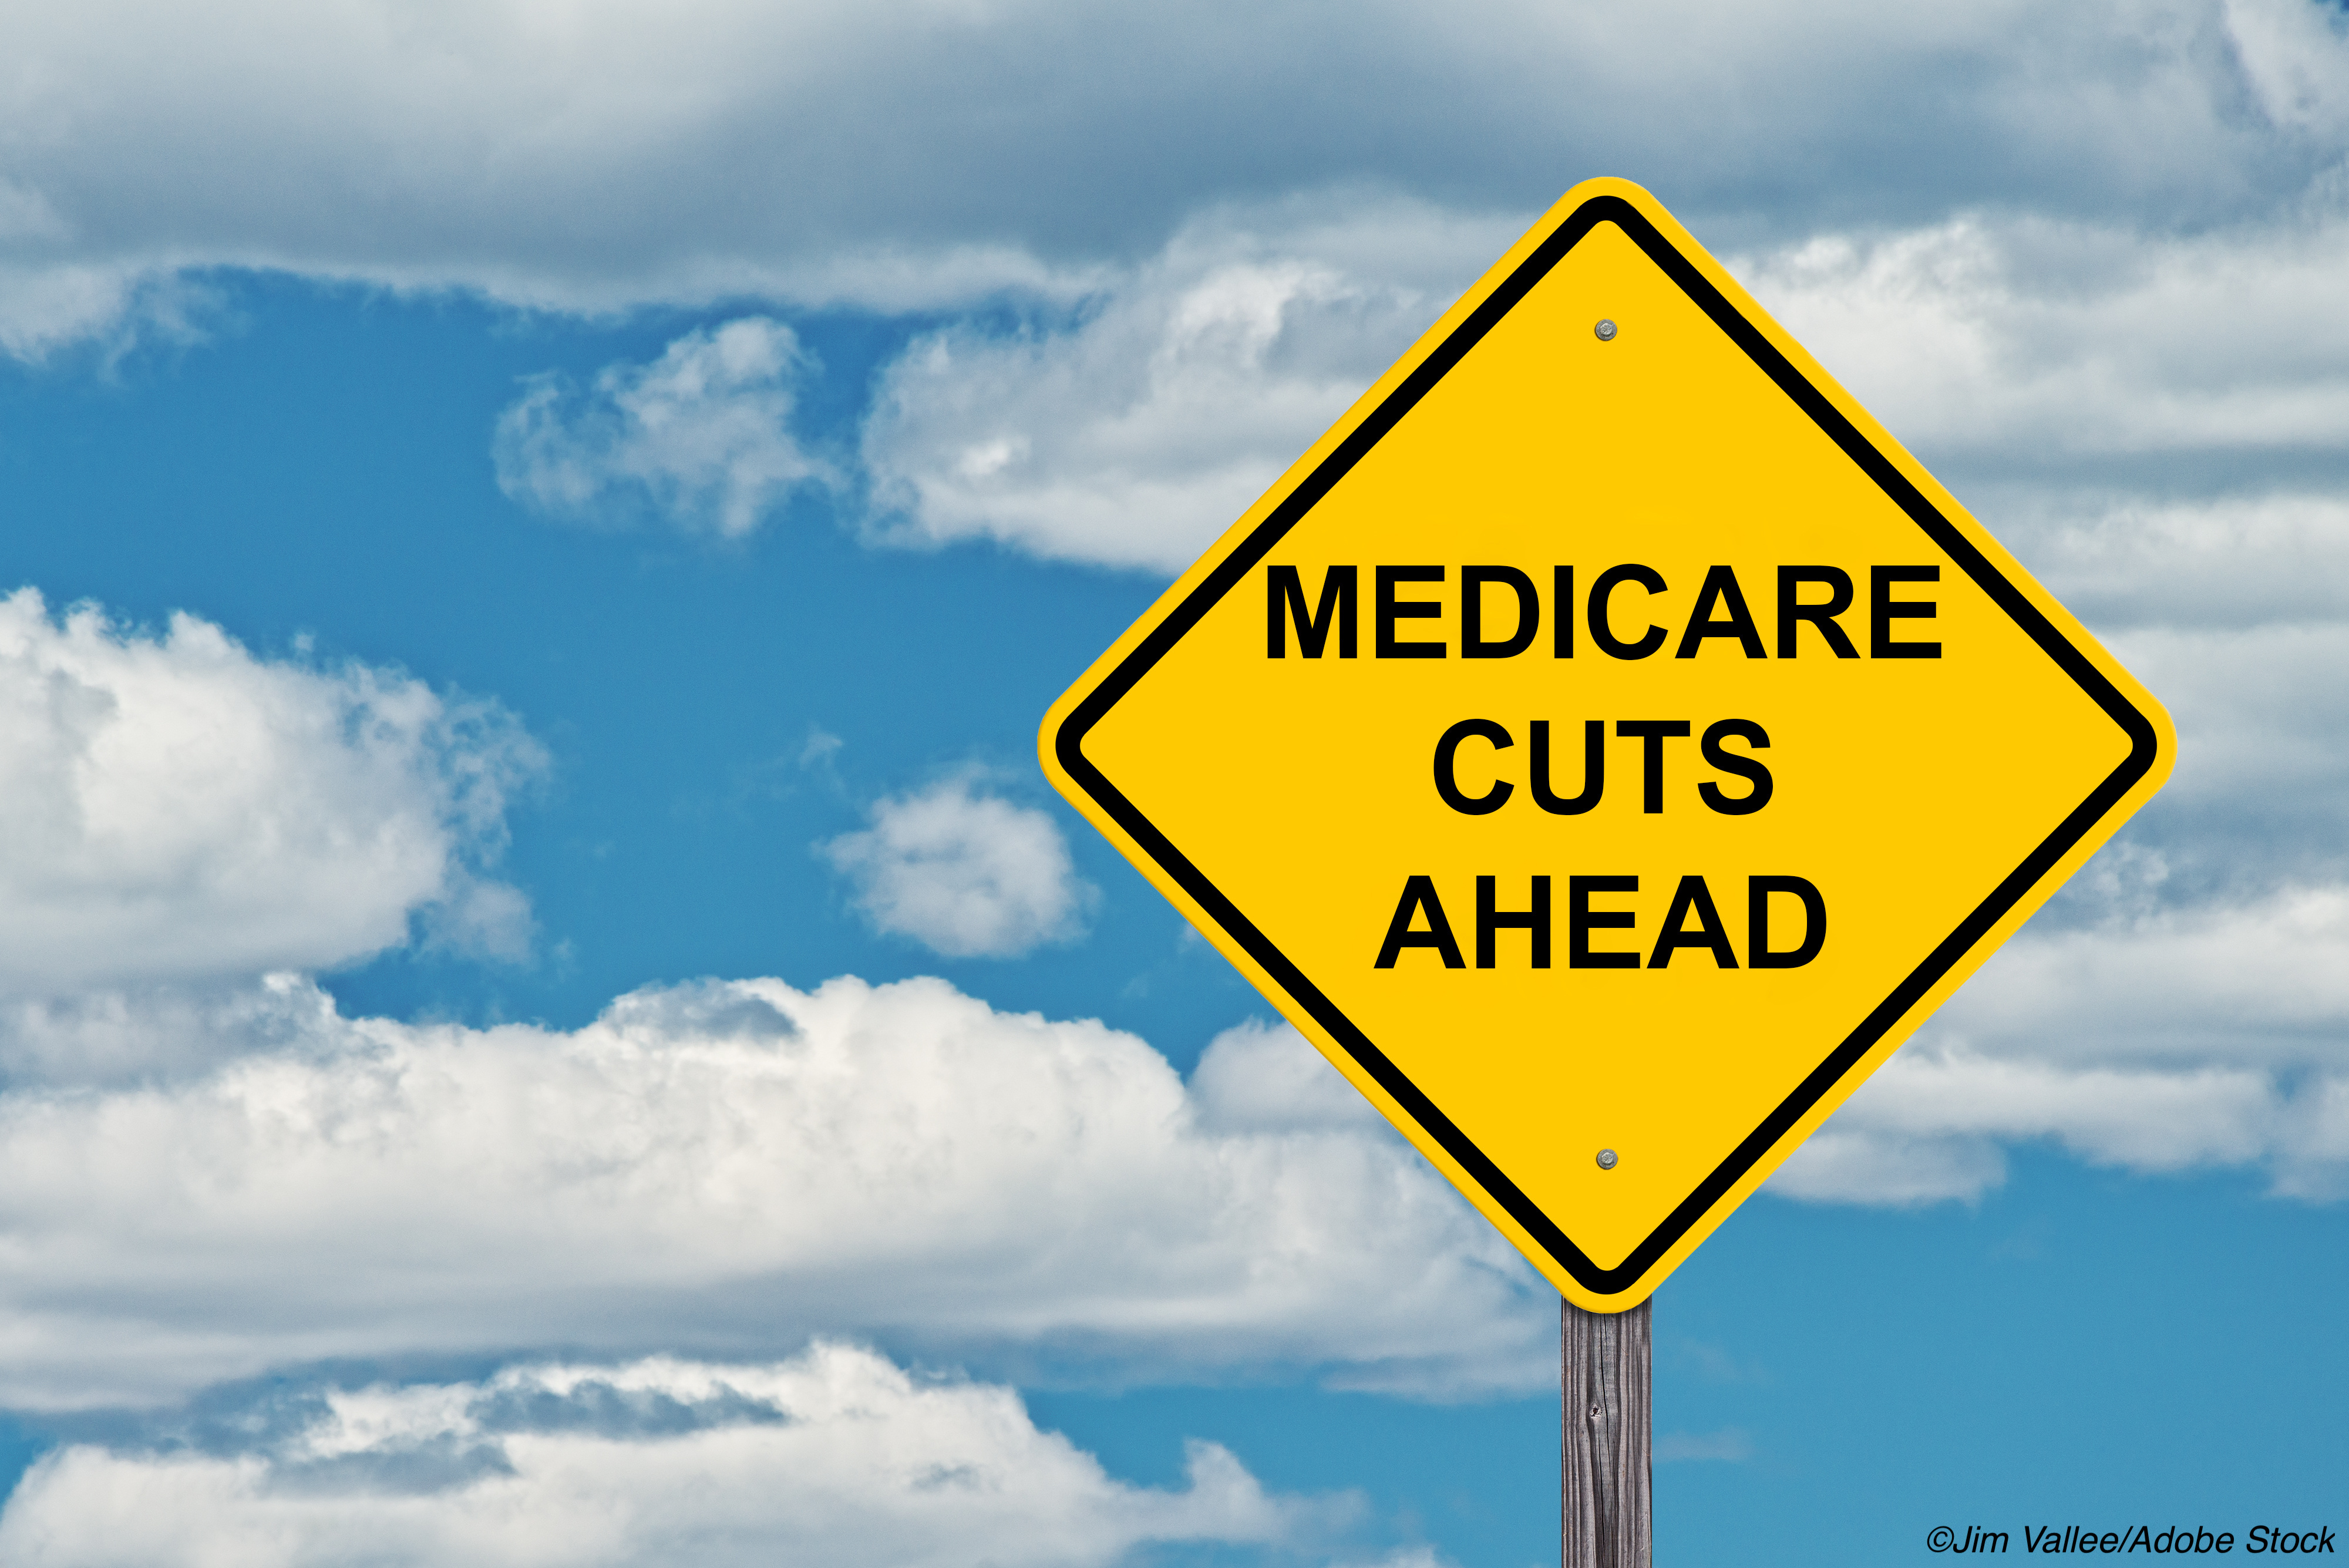 AMA Says Congress Dropped the Ball on Stopping Medicare Cuts